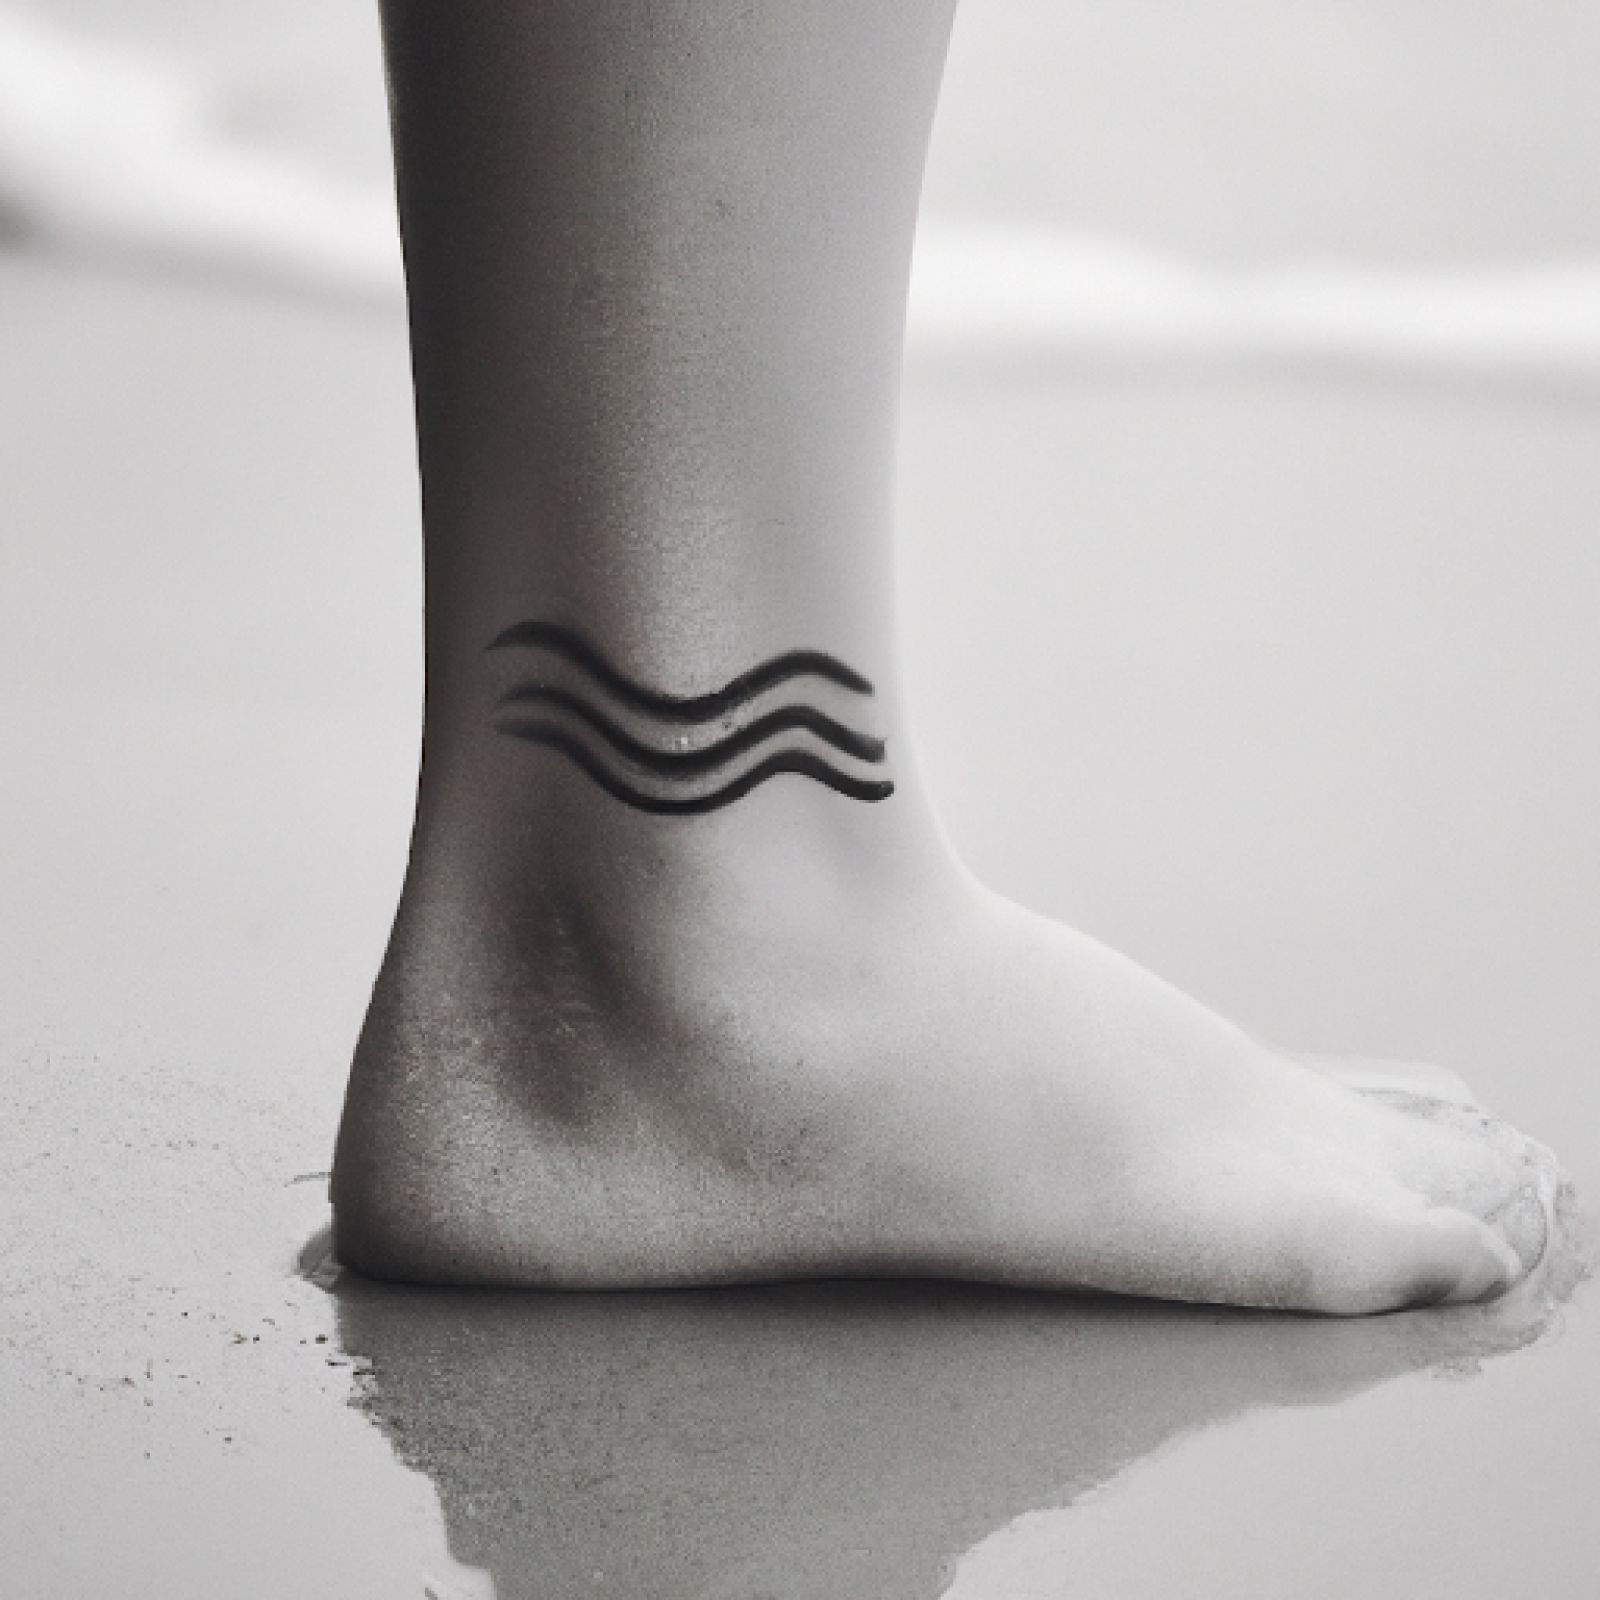 Wave tattoo on foot for women